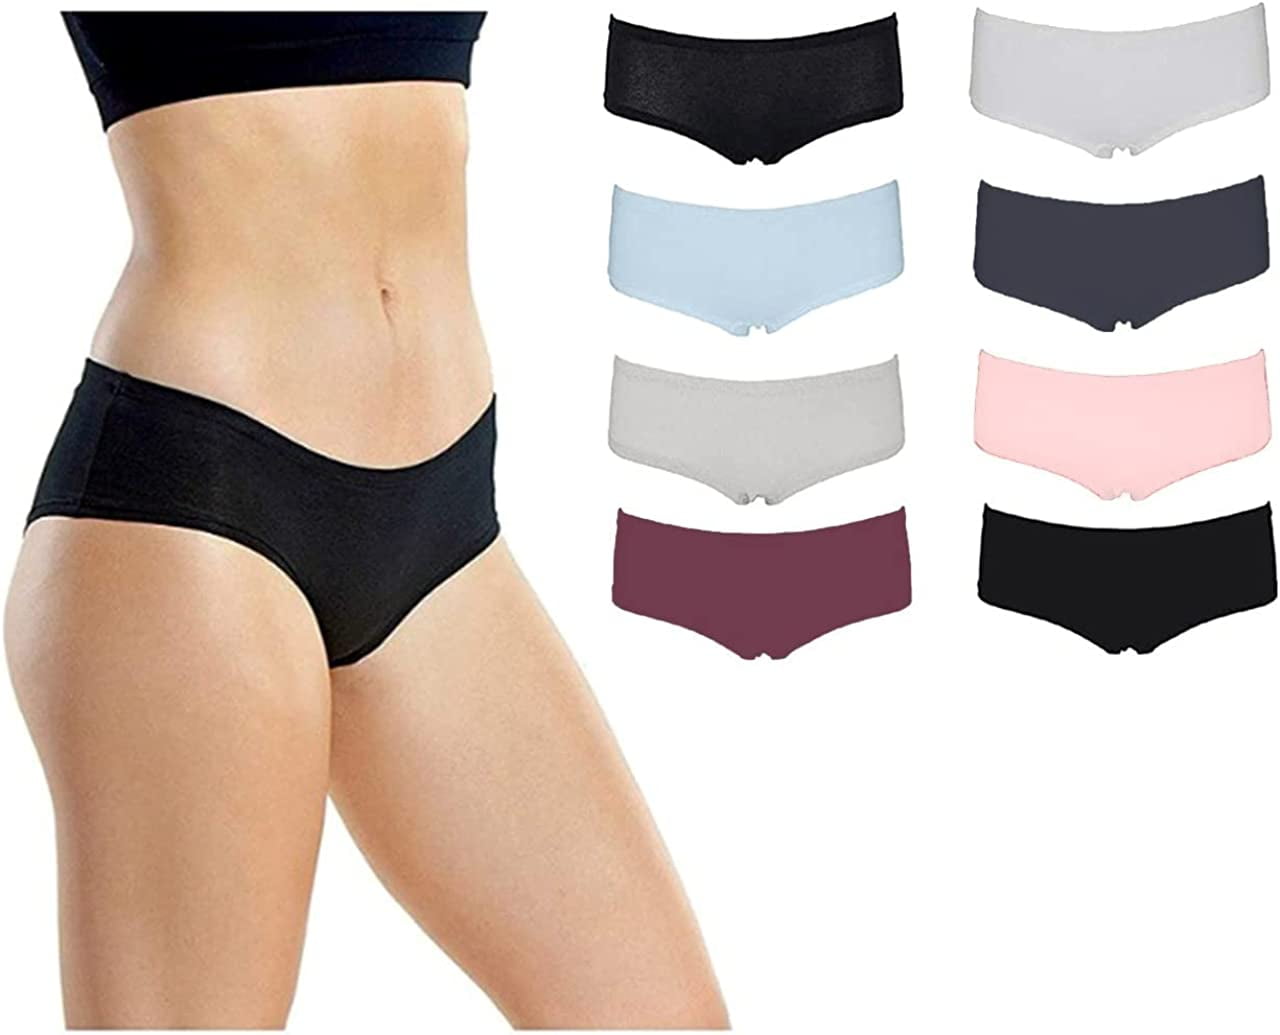 DR + SANTE Seamless Women's Underwear 3-Pack Thin Breathable Invisible and  Elastic-Free Hipster Panties for Active Ladies at  Women's Clothing  store